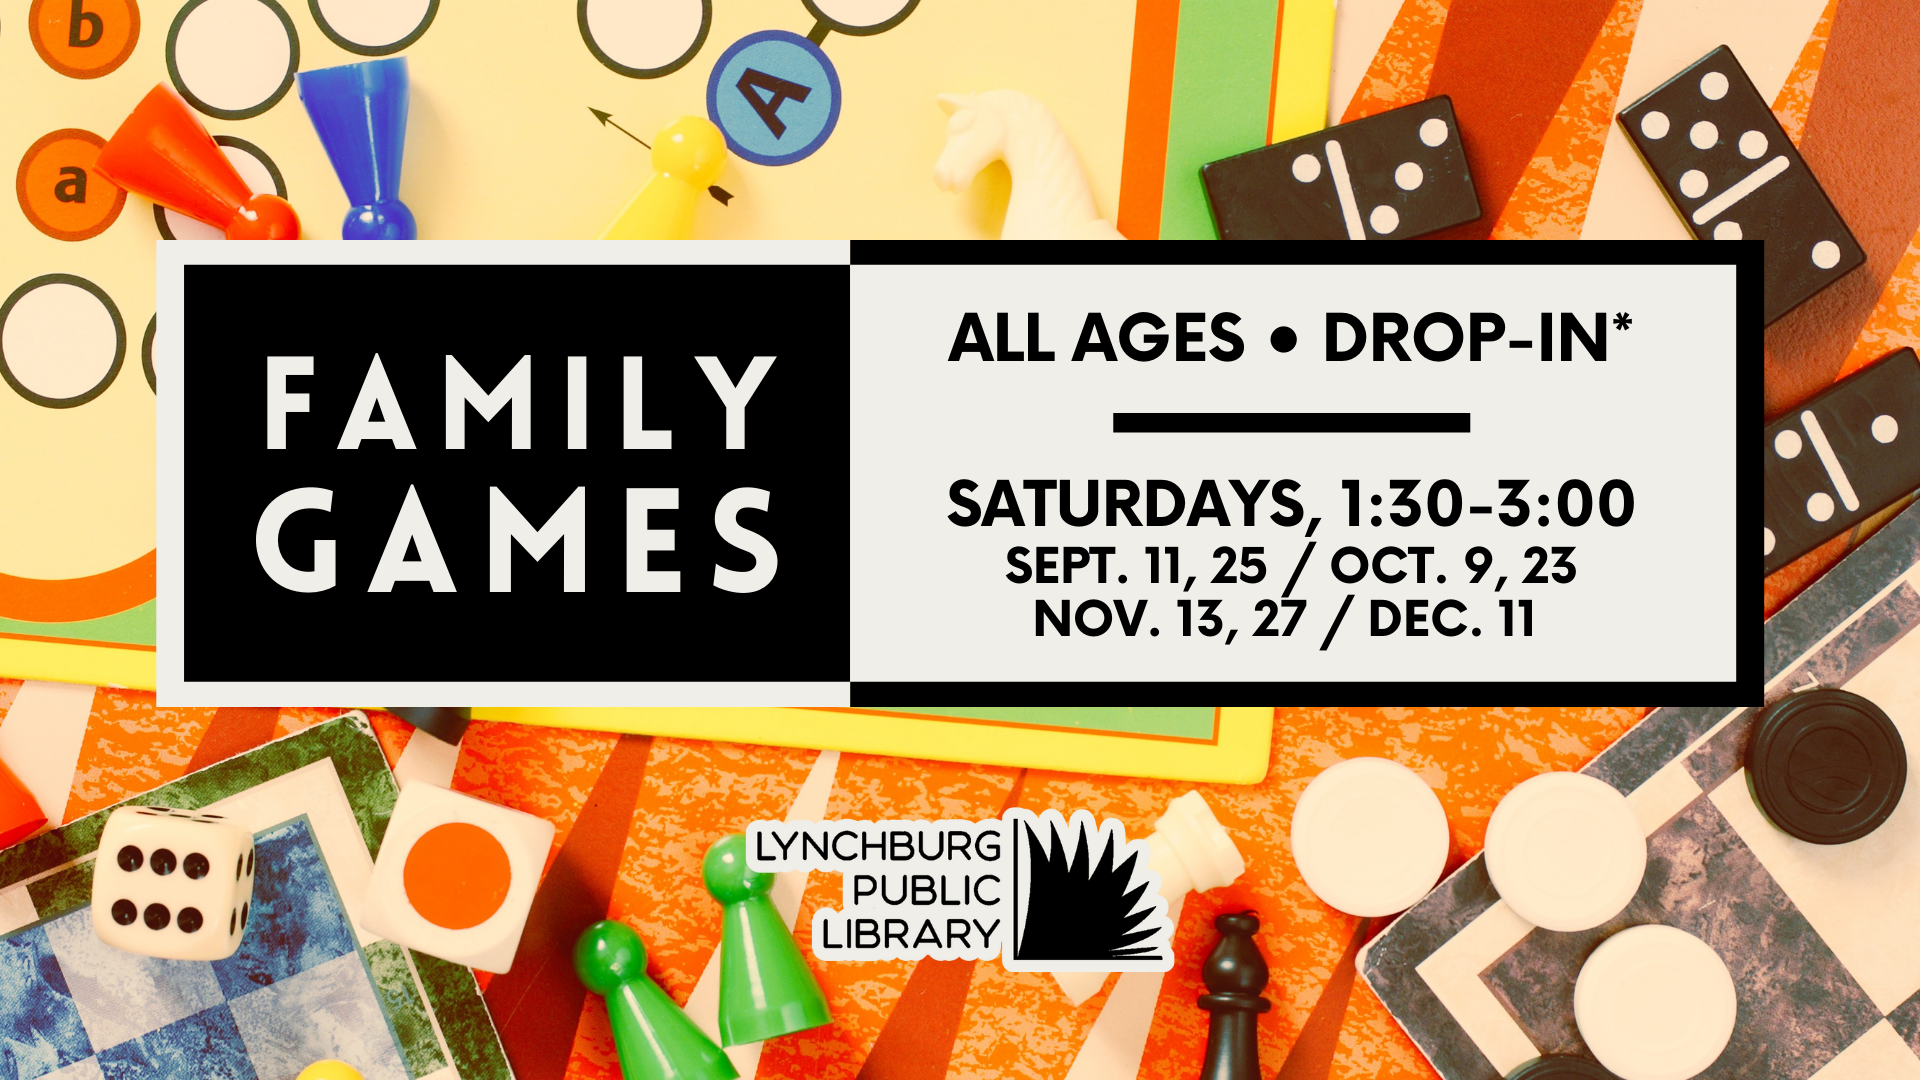 Image has a background featuring board game pieces and dice, with the words Family Games in the center along with the event dates and times as listed here